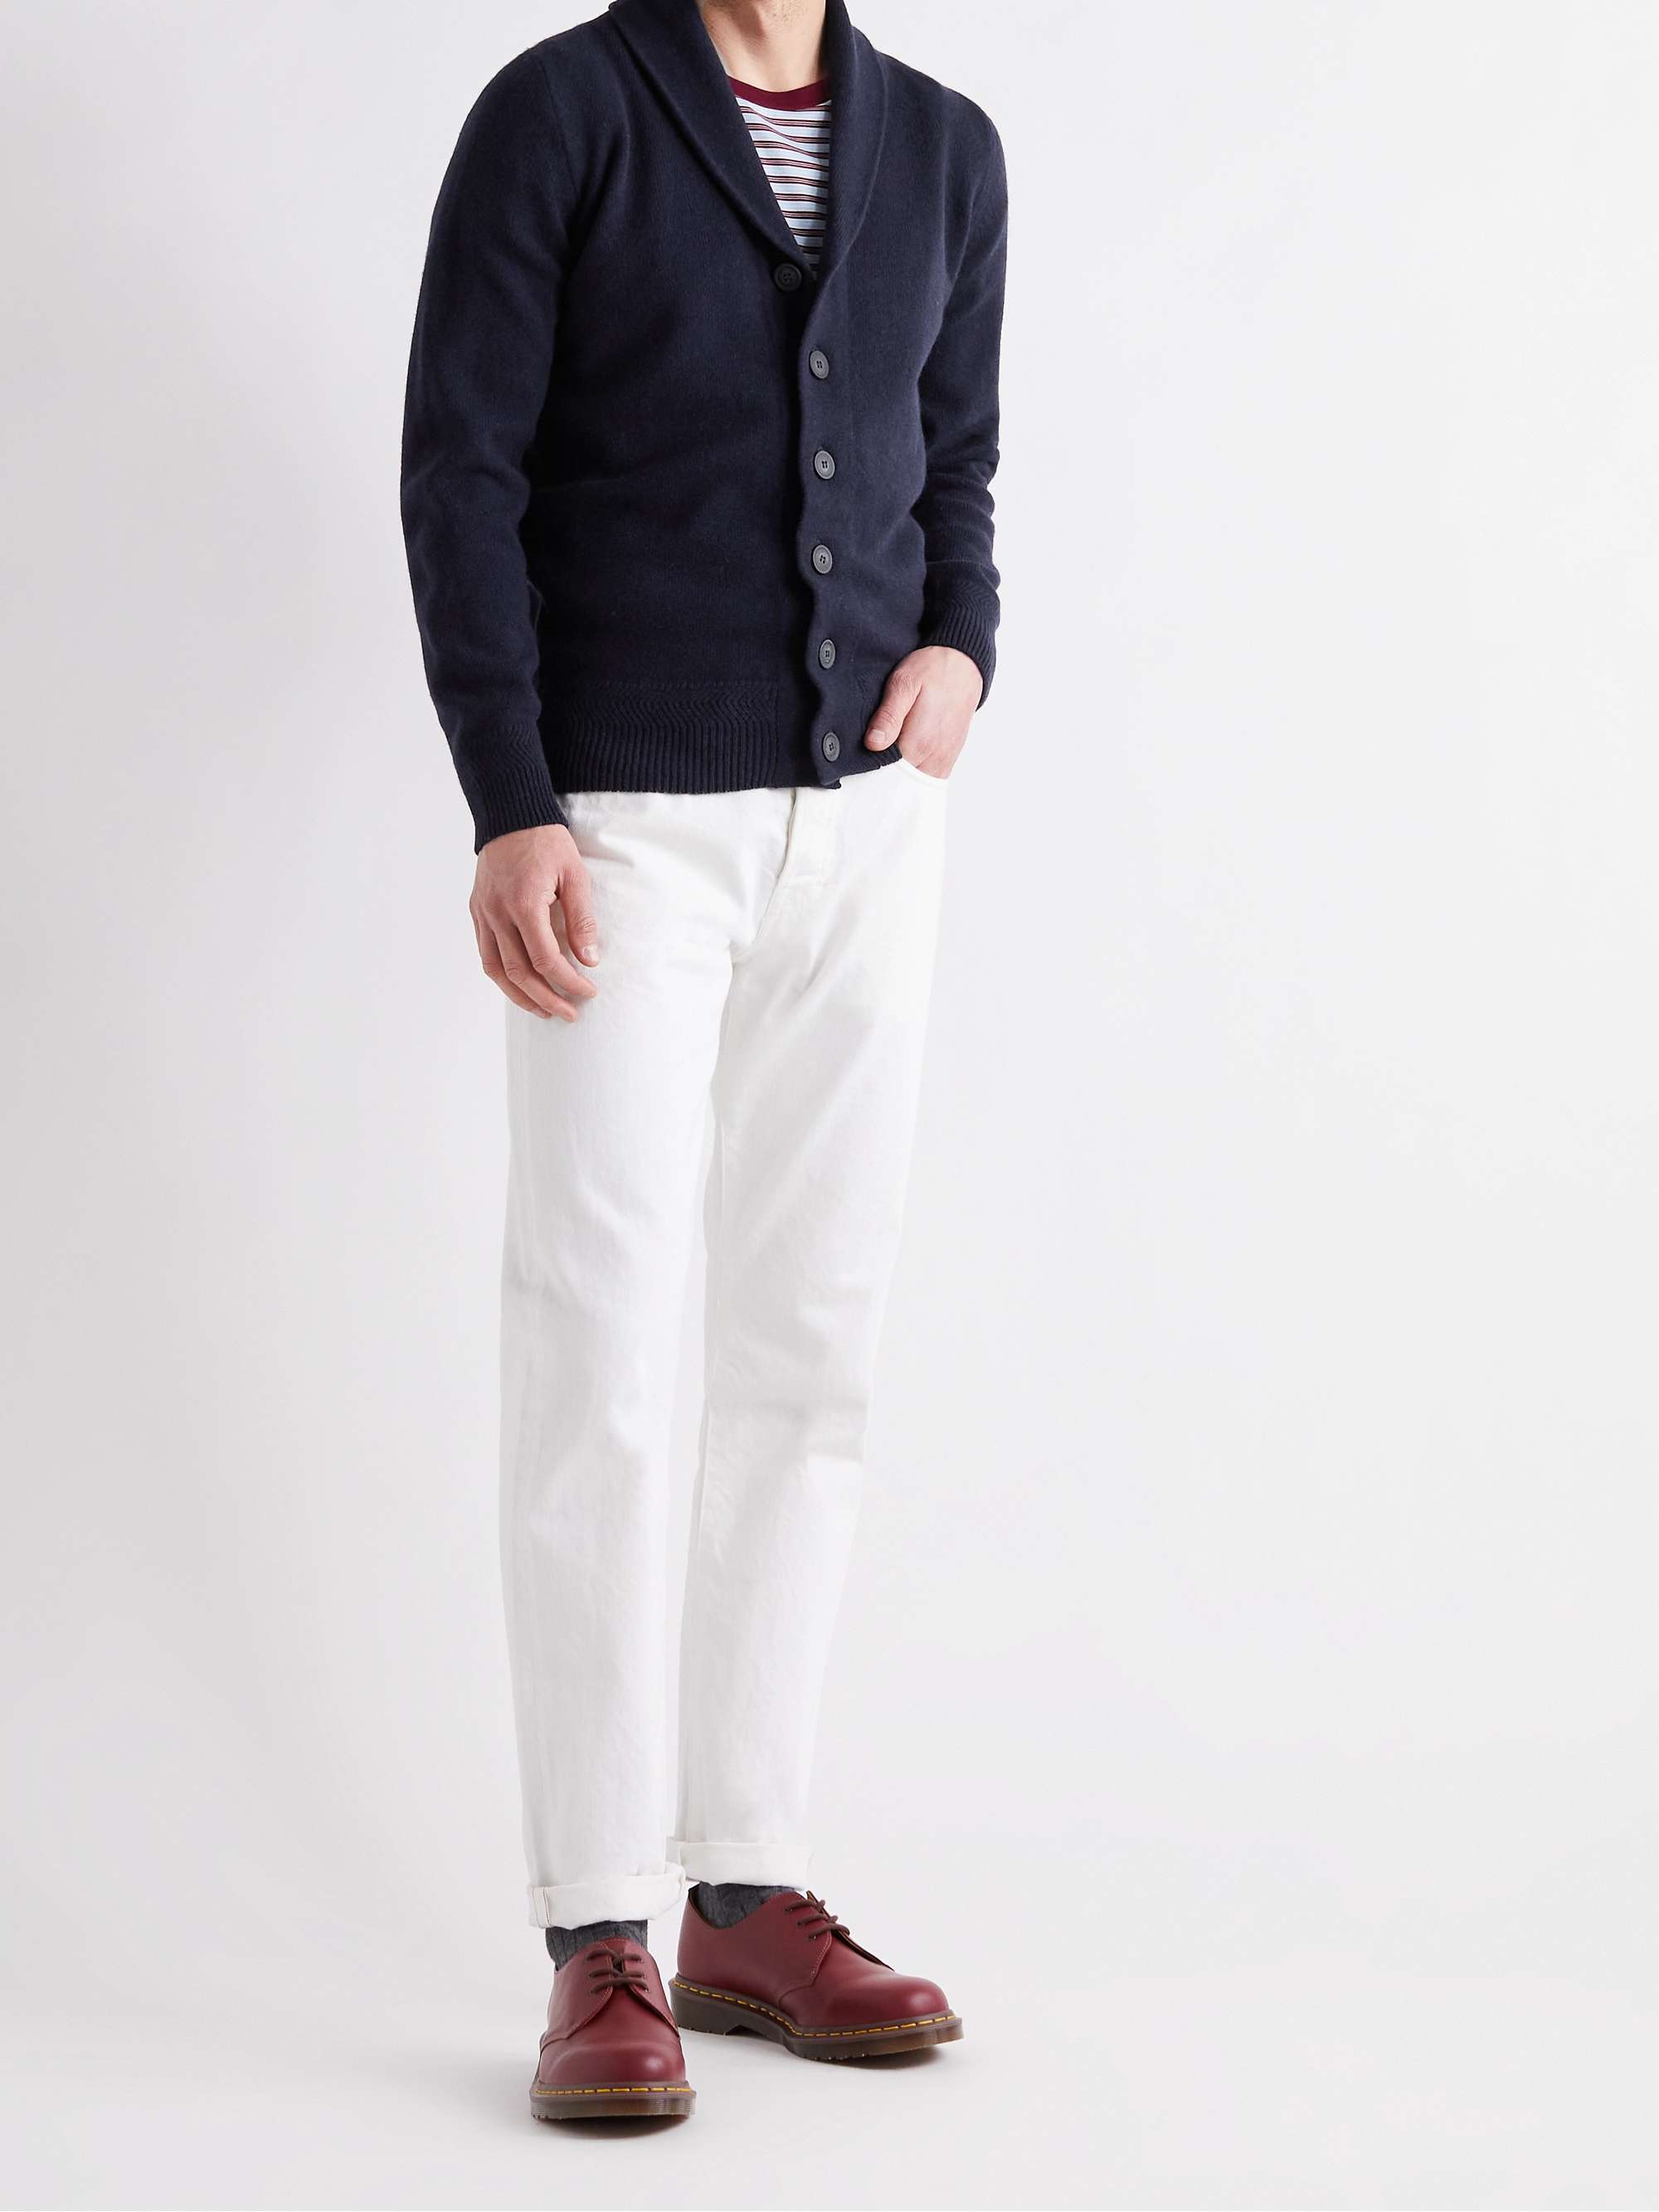 JOHN SMEDLEY Cullen Slim-Fit Recycled Cashmere and Merino Wool-Blend Cardigan